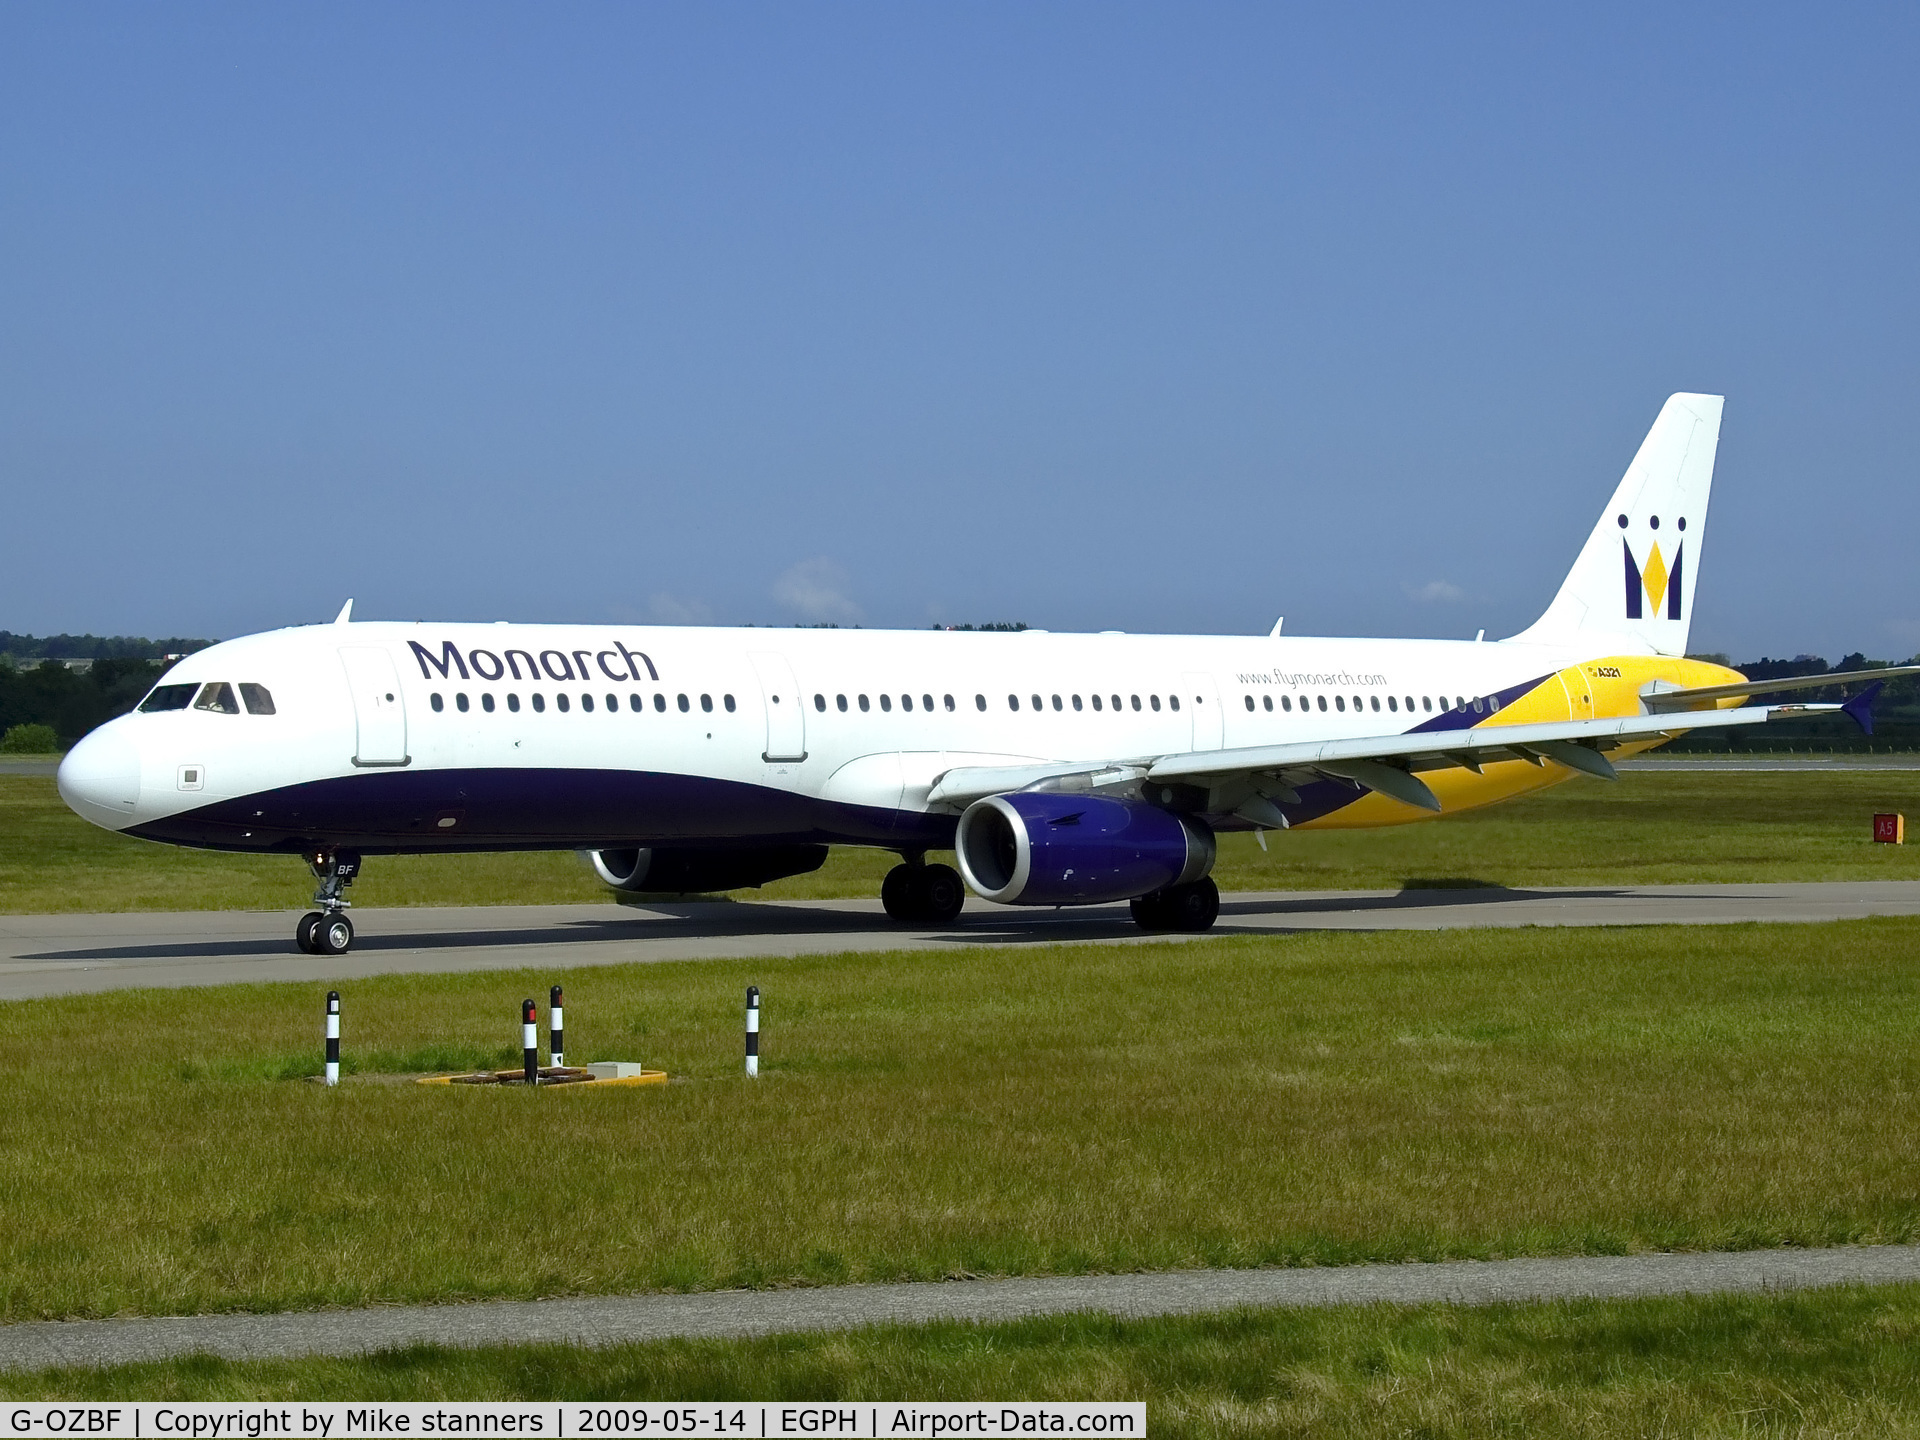 G-OZBF, 2002 Airbus A321-231 C/N 1763, Monarch airlines A321 Taxiing to runway 06 at EDI